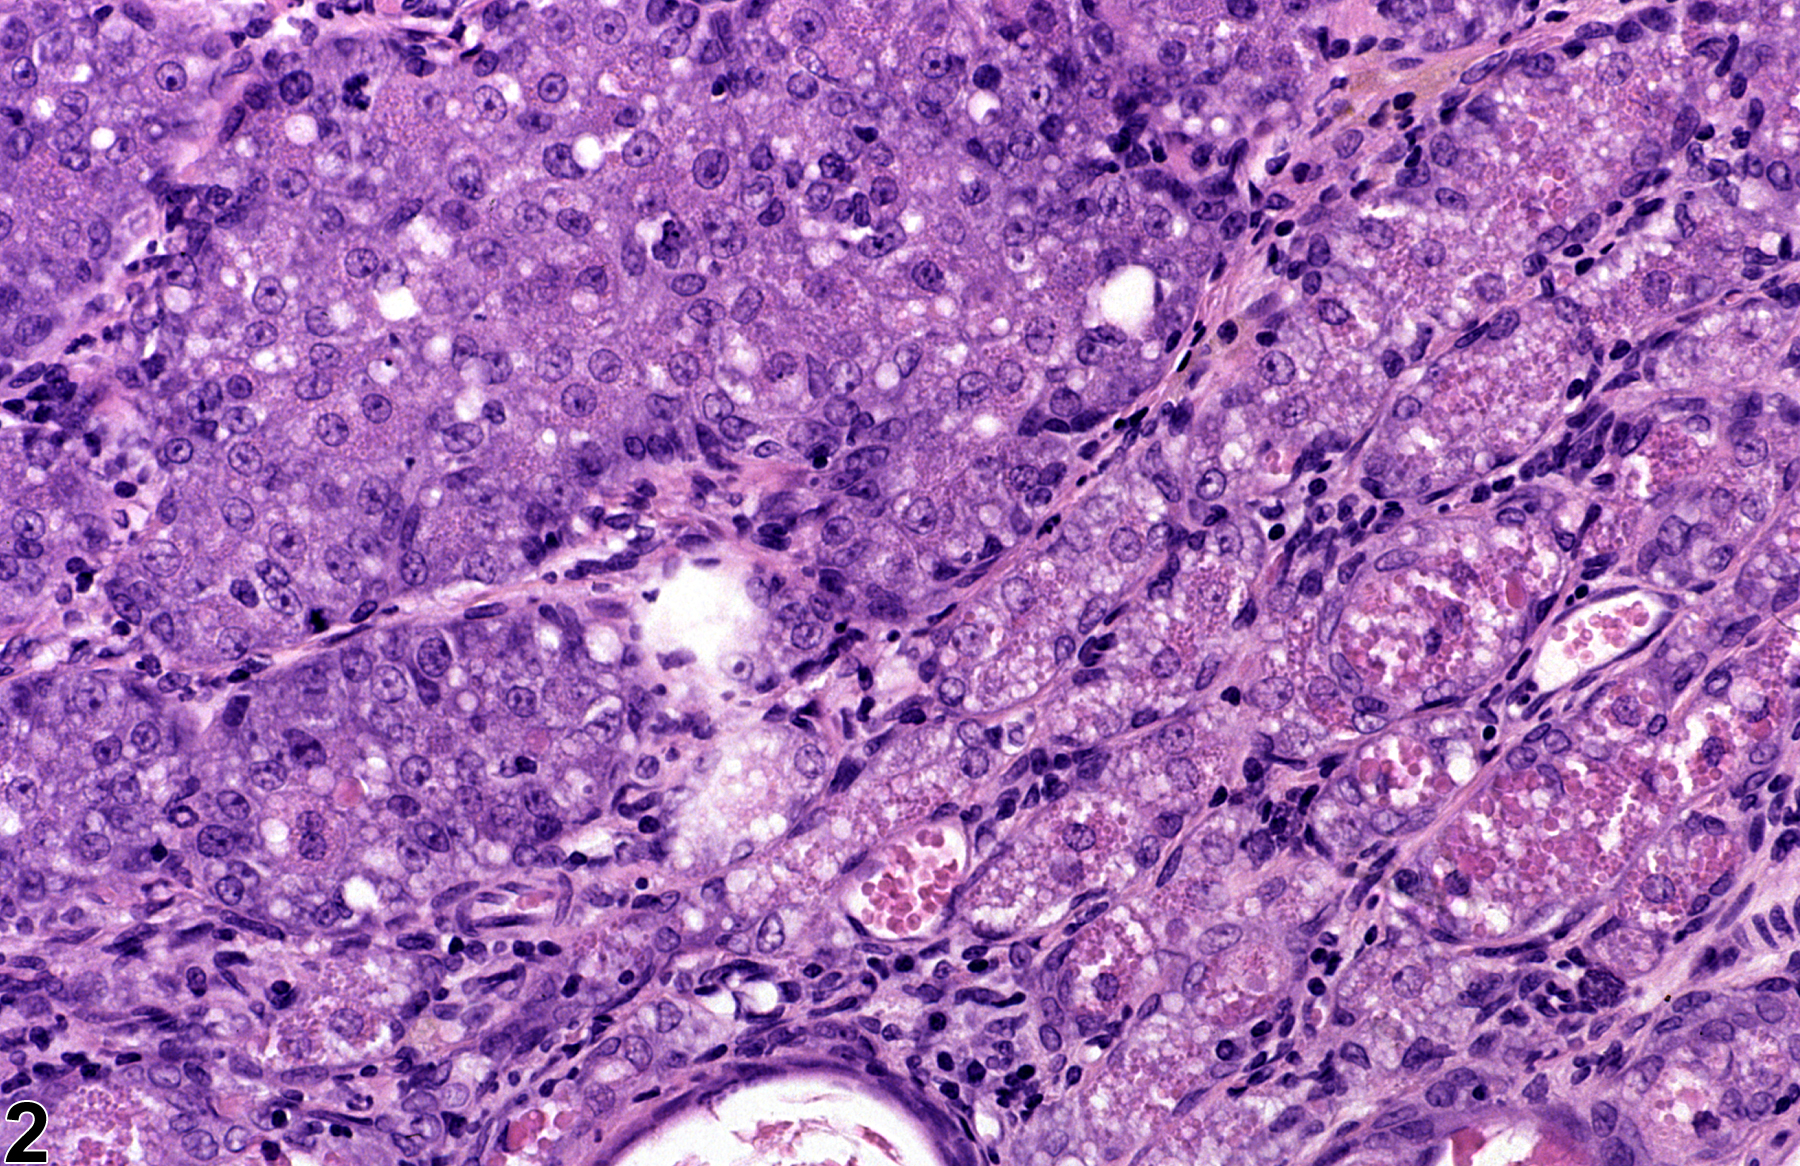 Image of hyperplasia in the clitoral gland from a female F344/N rat in a chronic study